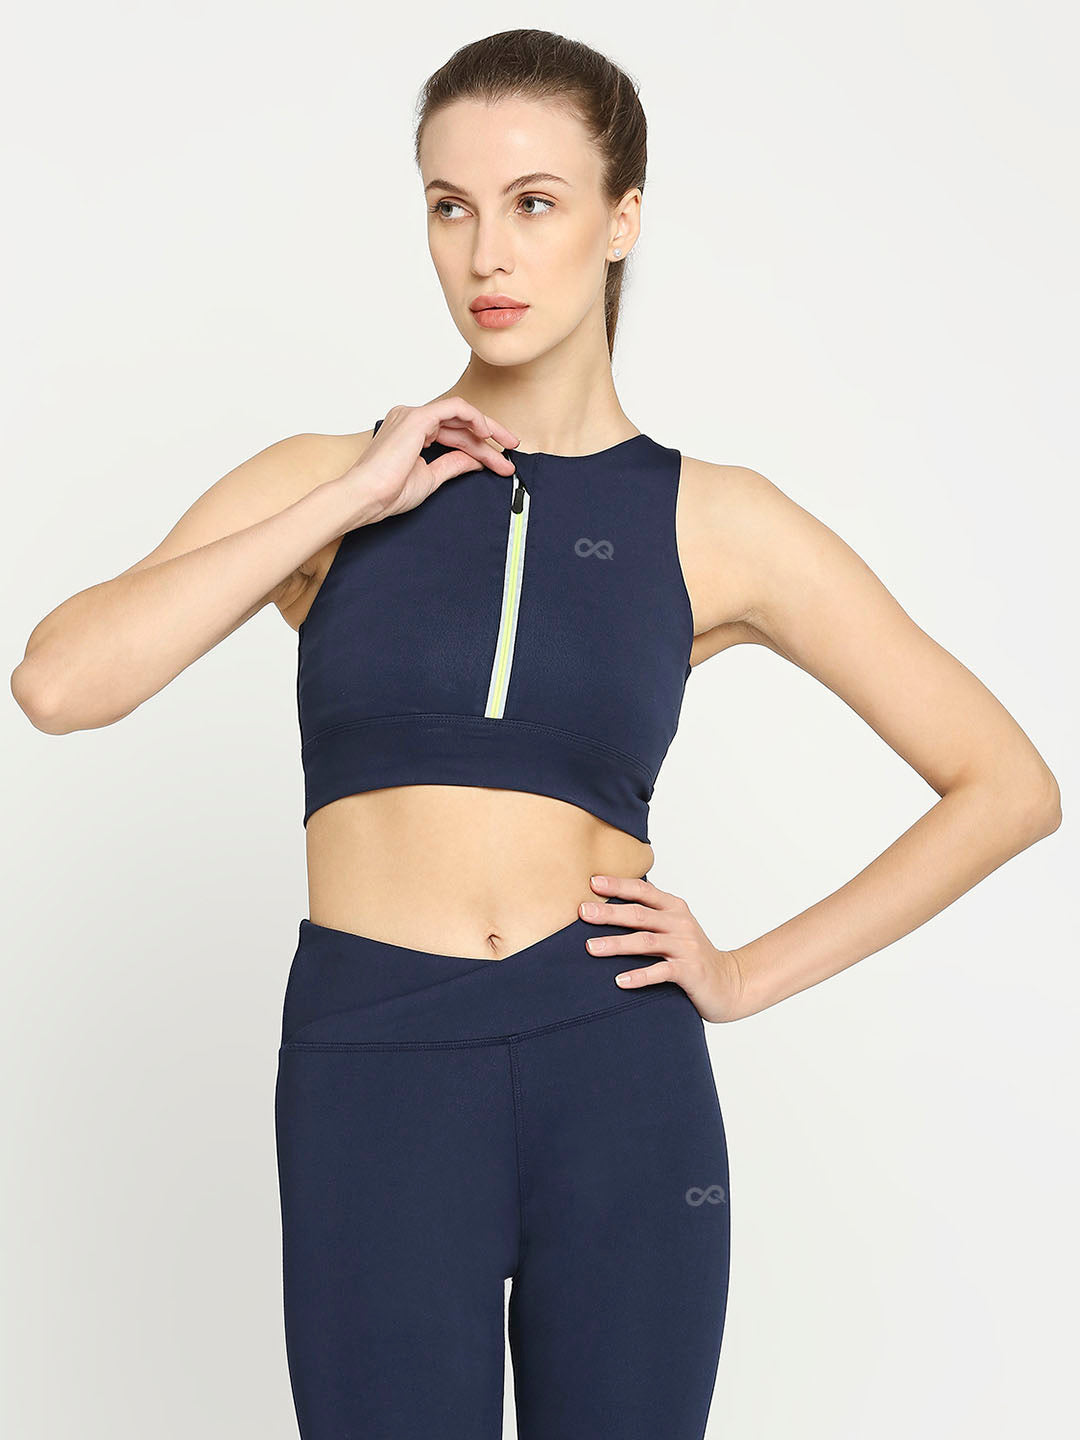 Women's Royal Blue Sports Bra - Stay Supported and Stylish